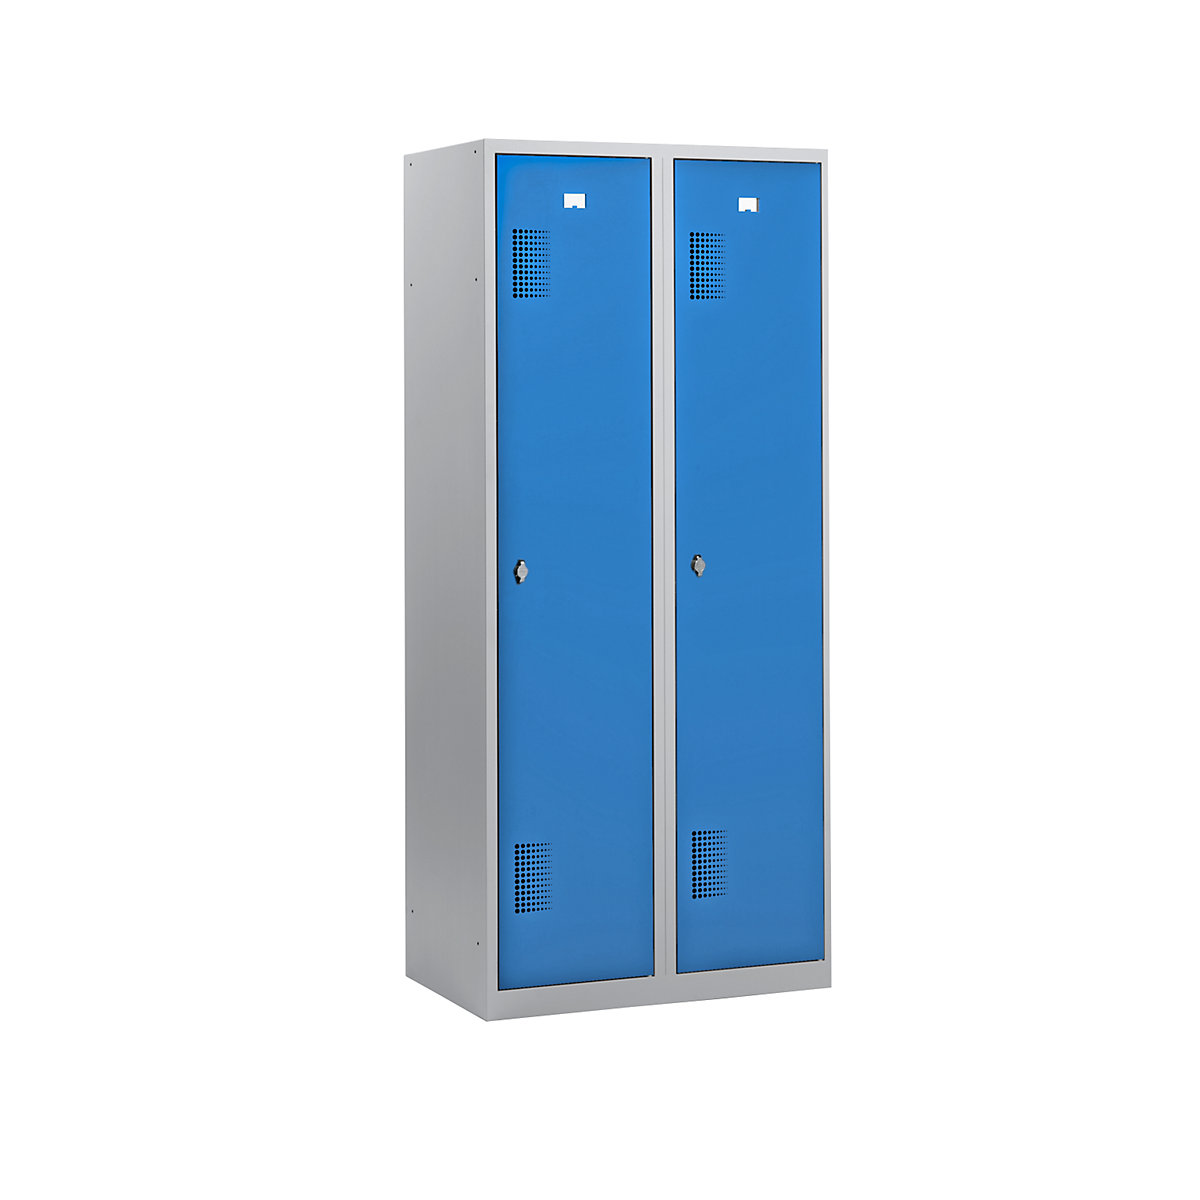 AMSTERDAM cloakroom locker – eurokraft basic, height 1800 mm, width 800 mm, 2 x 398 mm wide compartments, with fittings for padlock, light grey body / light blue doors-15